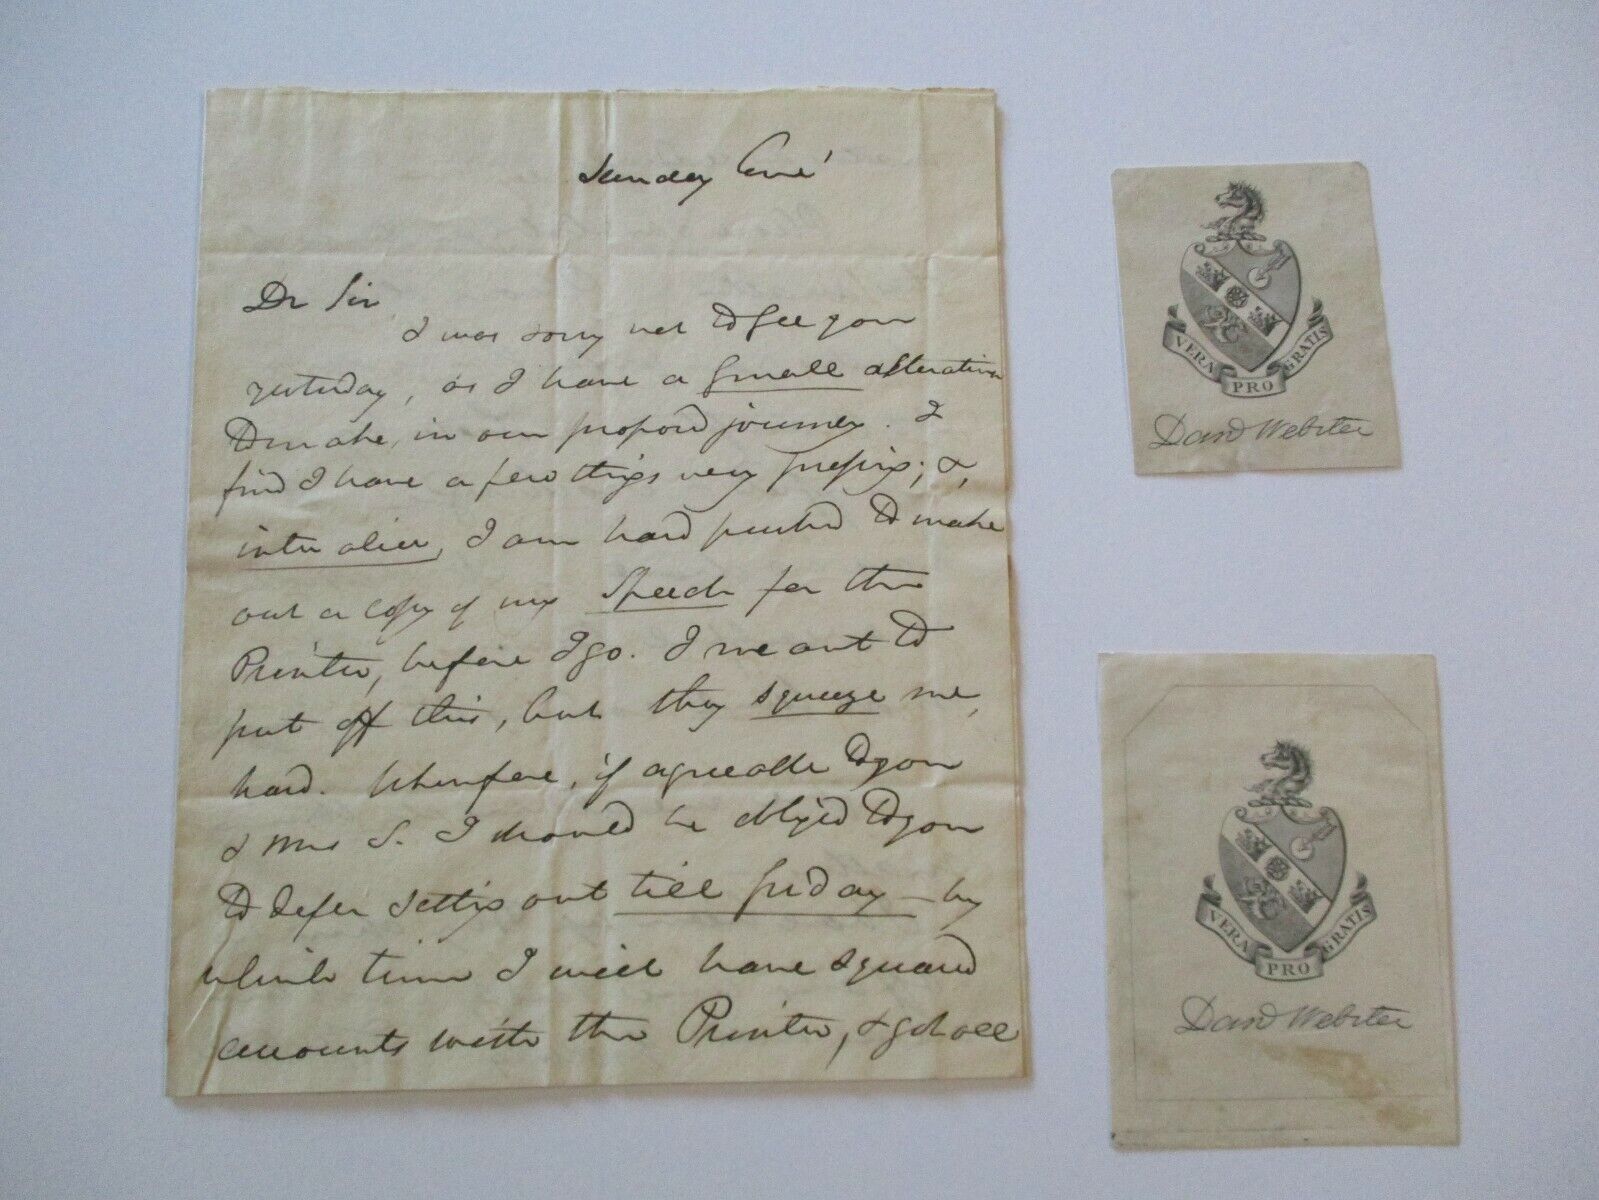 ANTIQUE DANIEL WEBSTER  SECRETARY OF STATE LETTER TO JOSEPH STORY SUPREME COURT